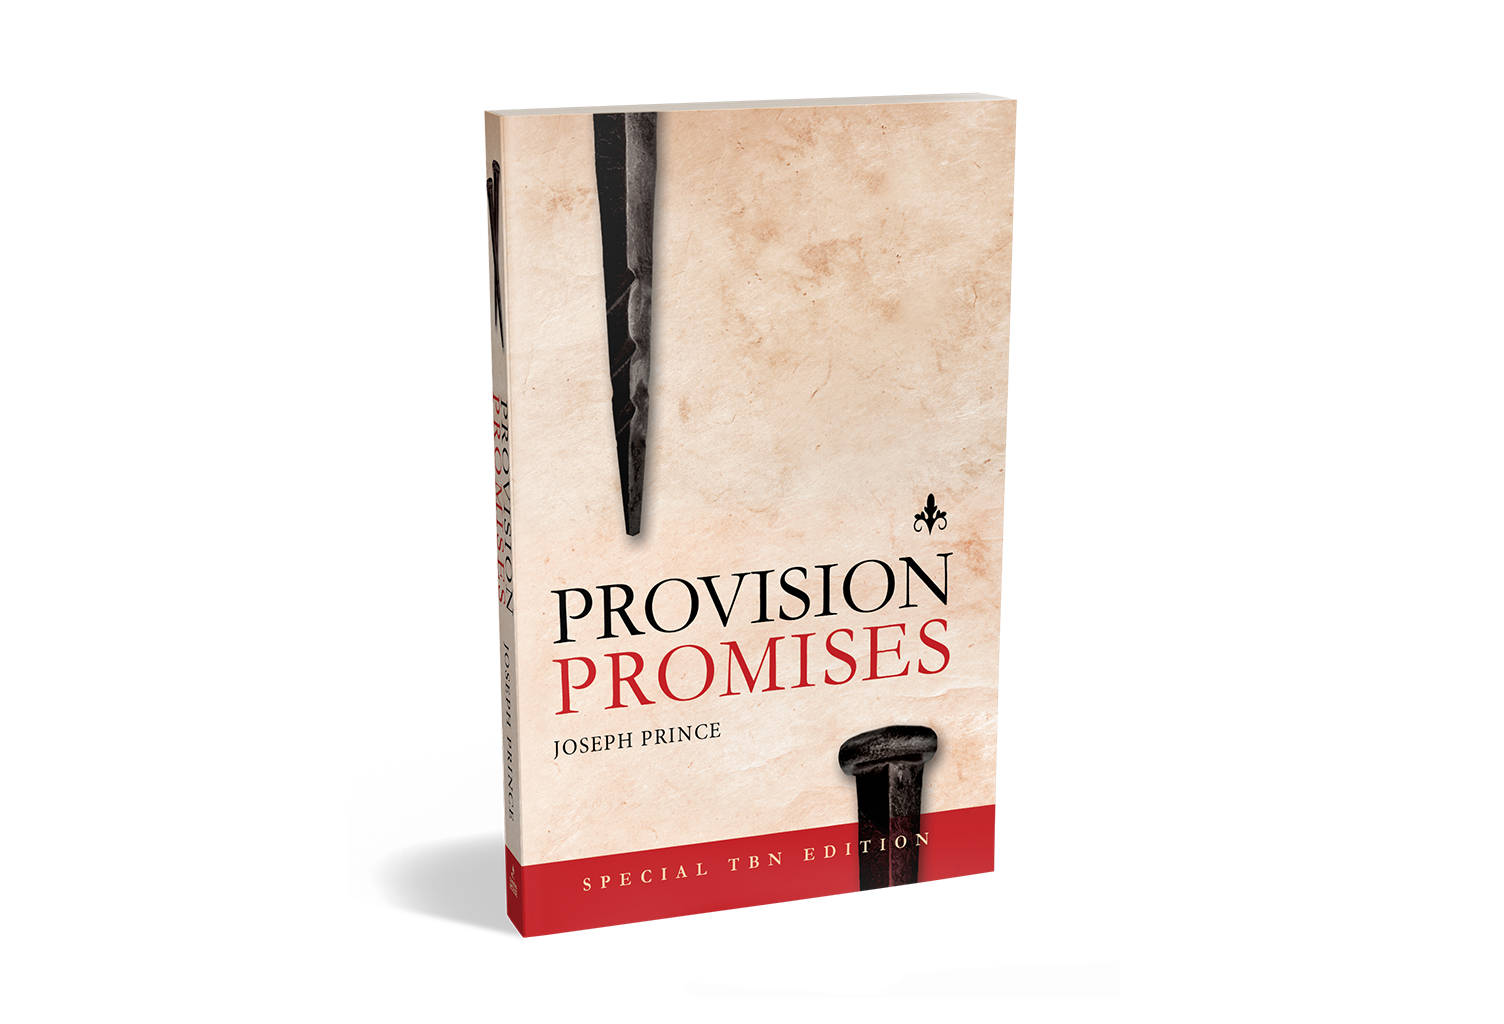 Provision Promises by Joseph Prince on TBN